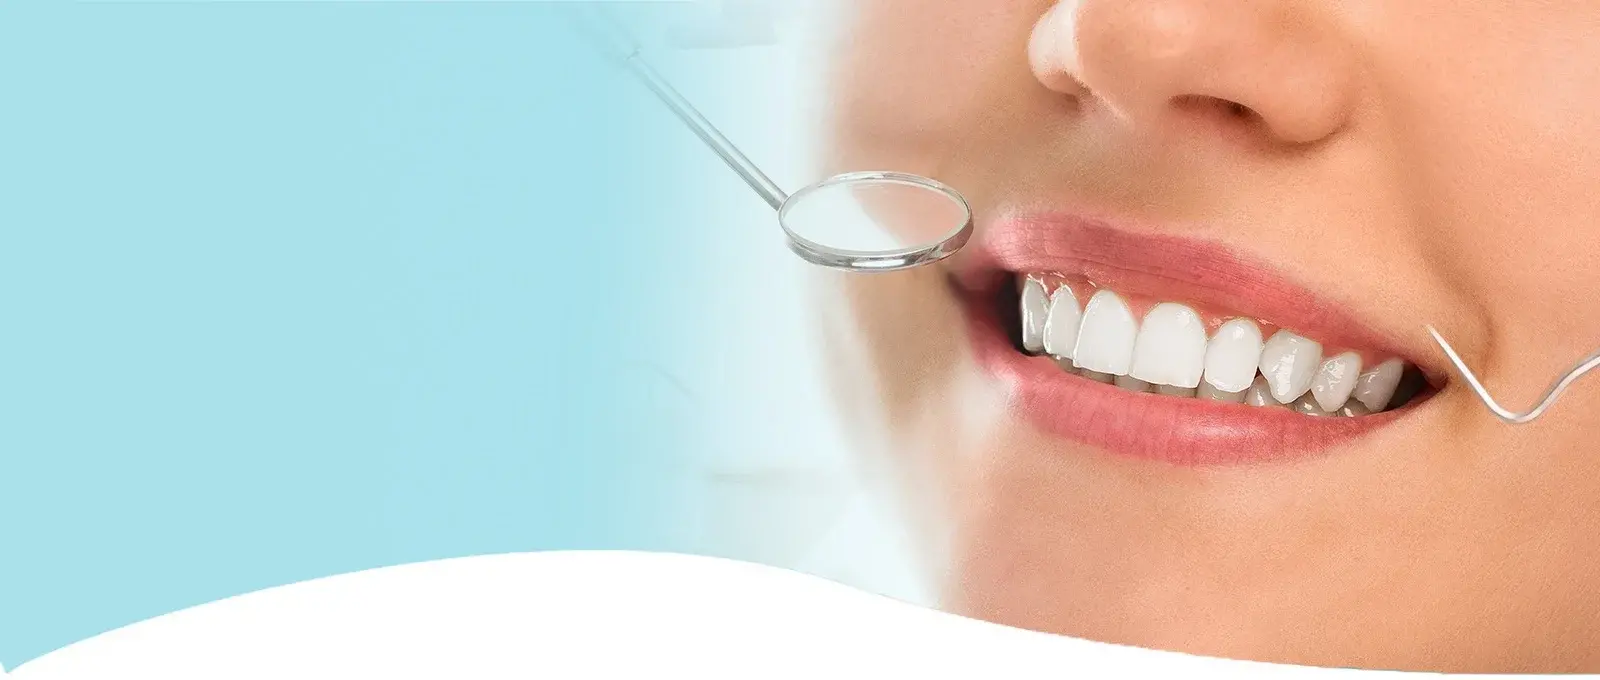 Brighten your smile with Teeth Whitening at West Lynde Dental in Whitby, enhancing your confidence